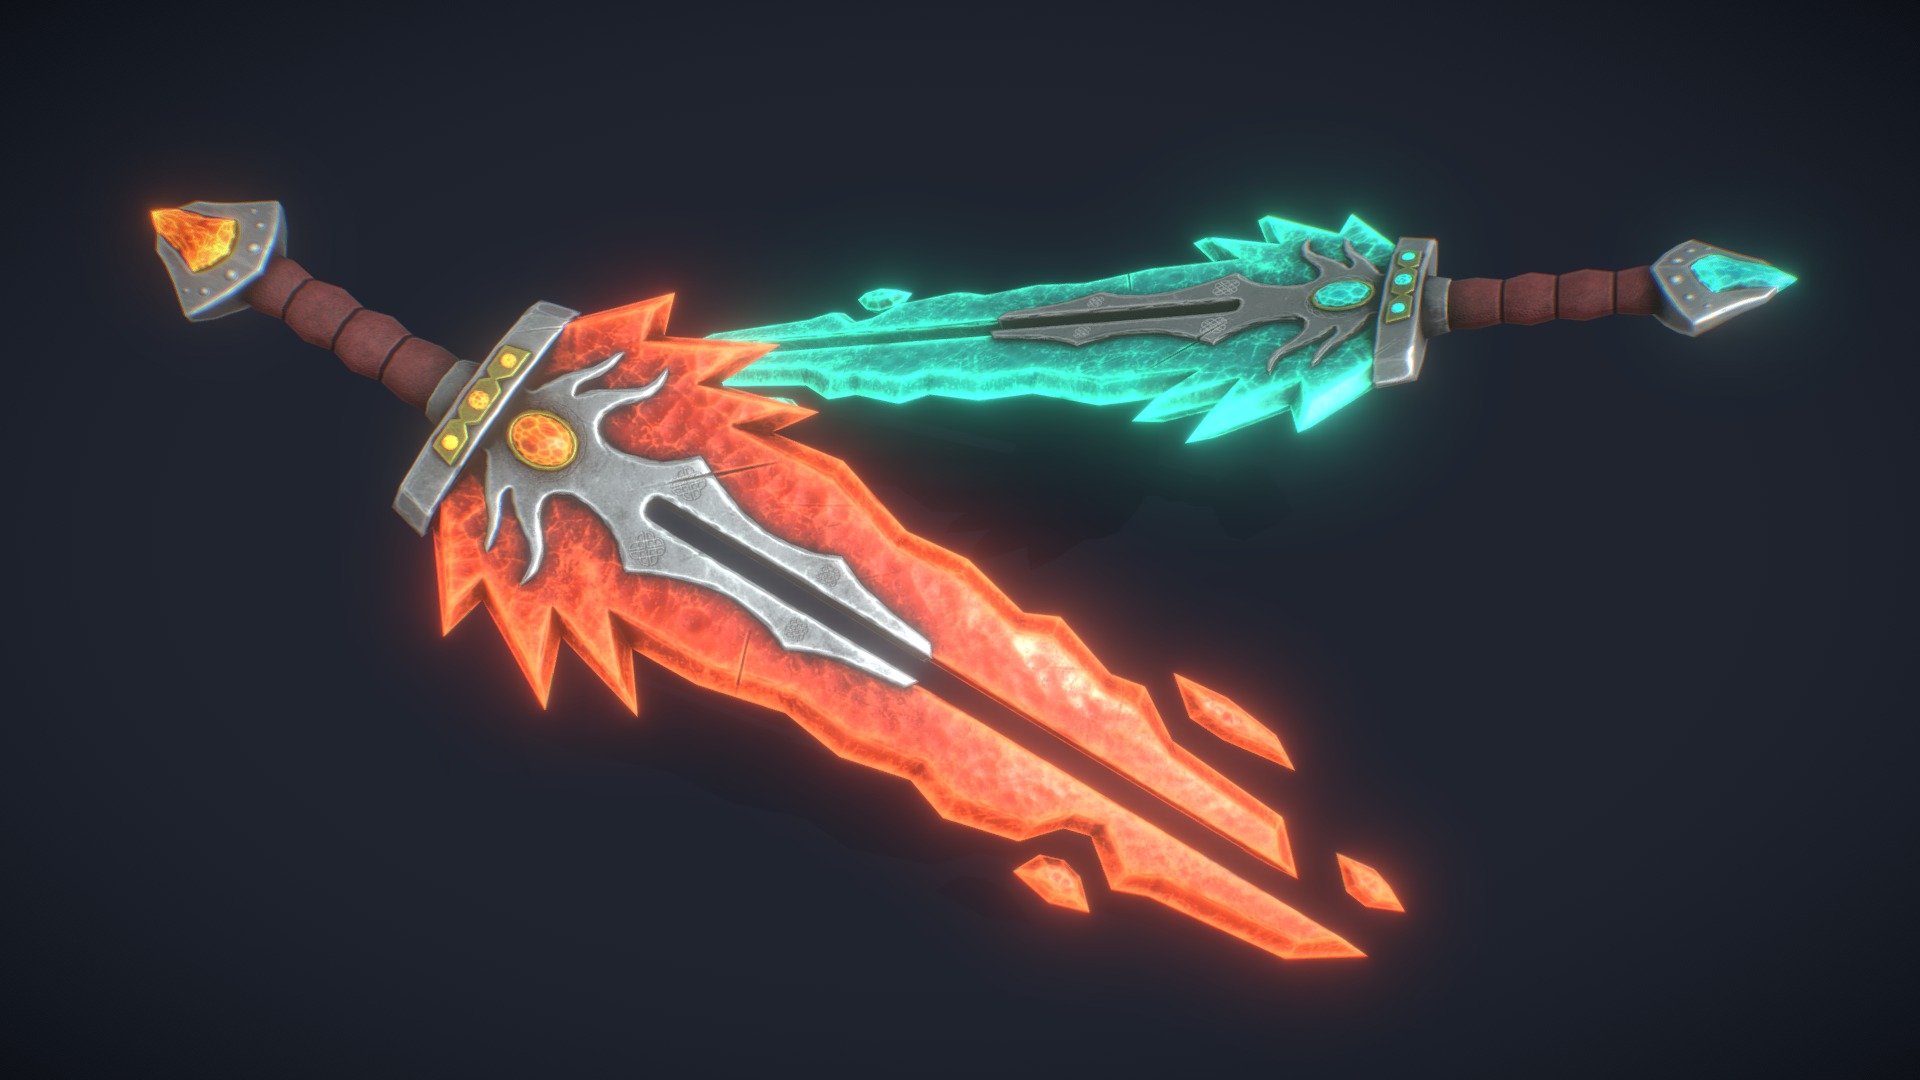 This is lowpoly example of stylized swords 3d model